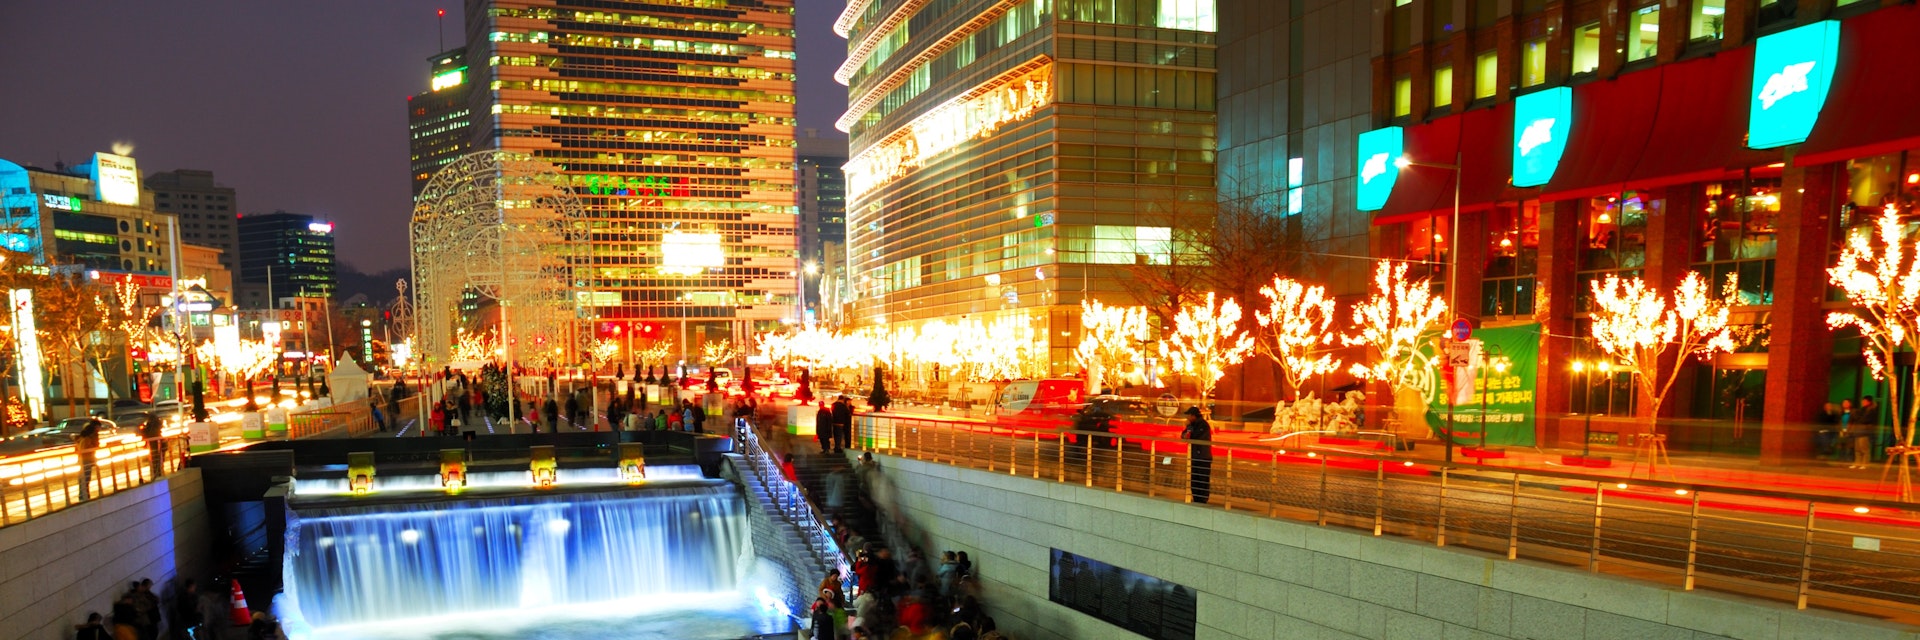 The Cheonggyecheon Stream draws crowds of locals out in early evening.